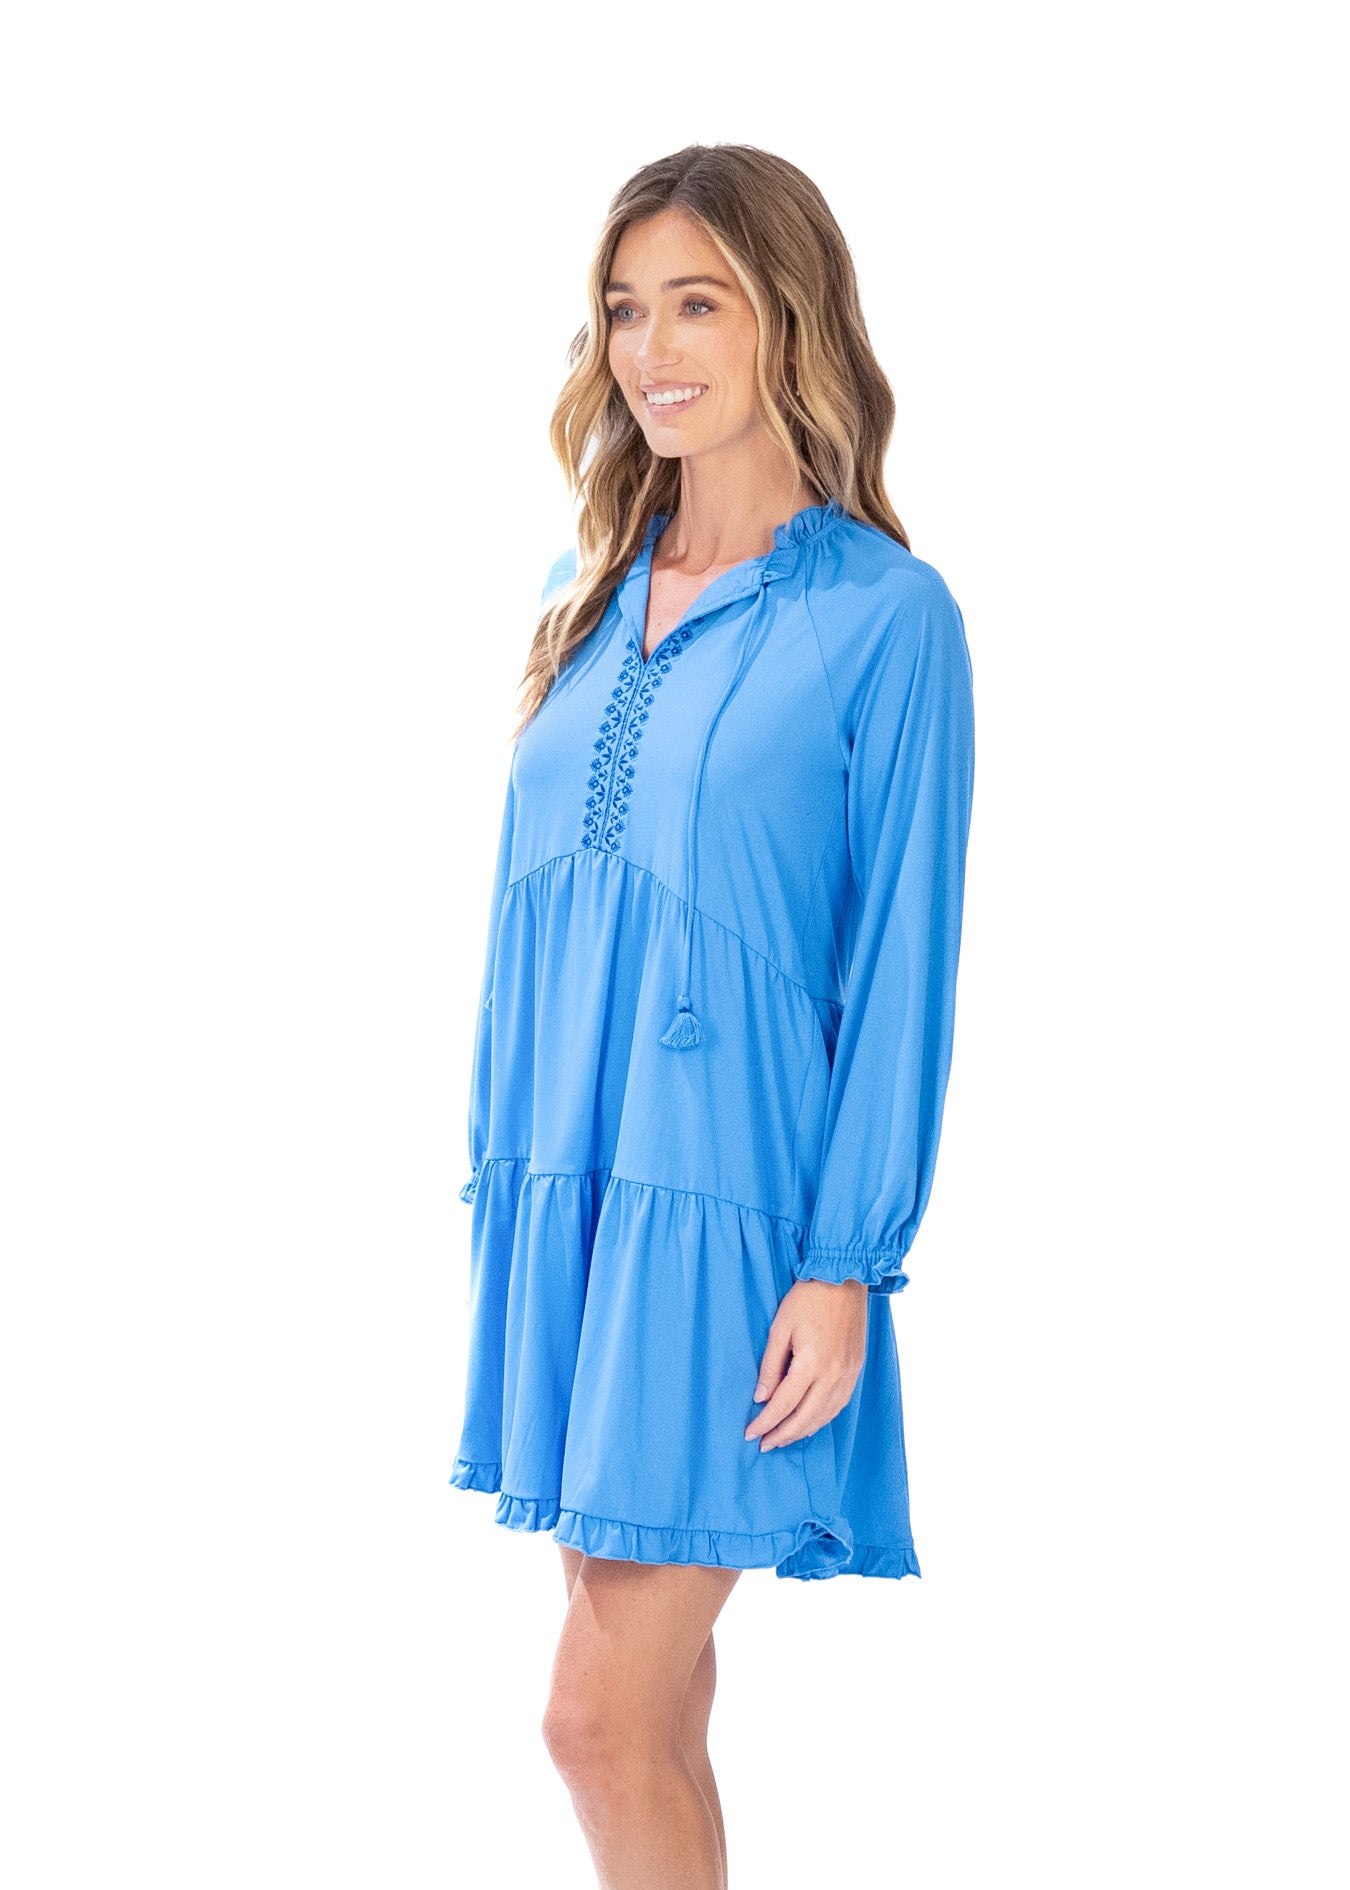 Side facing blonde woman wearing the Periwinkle Blue Embroidered Tiered Dress.